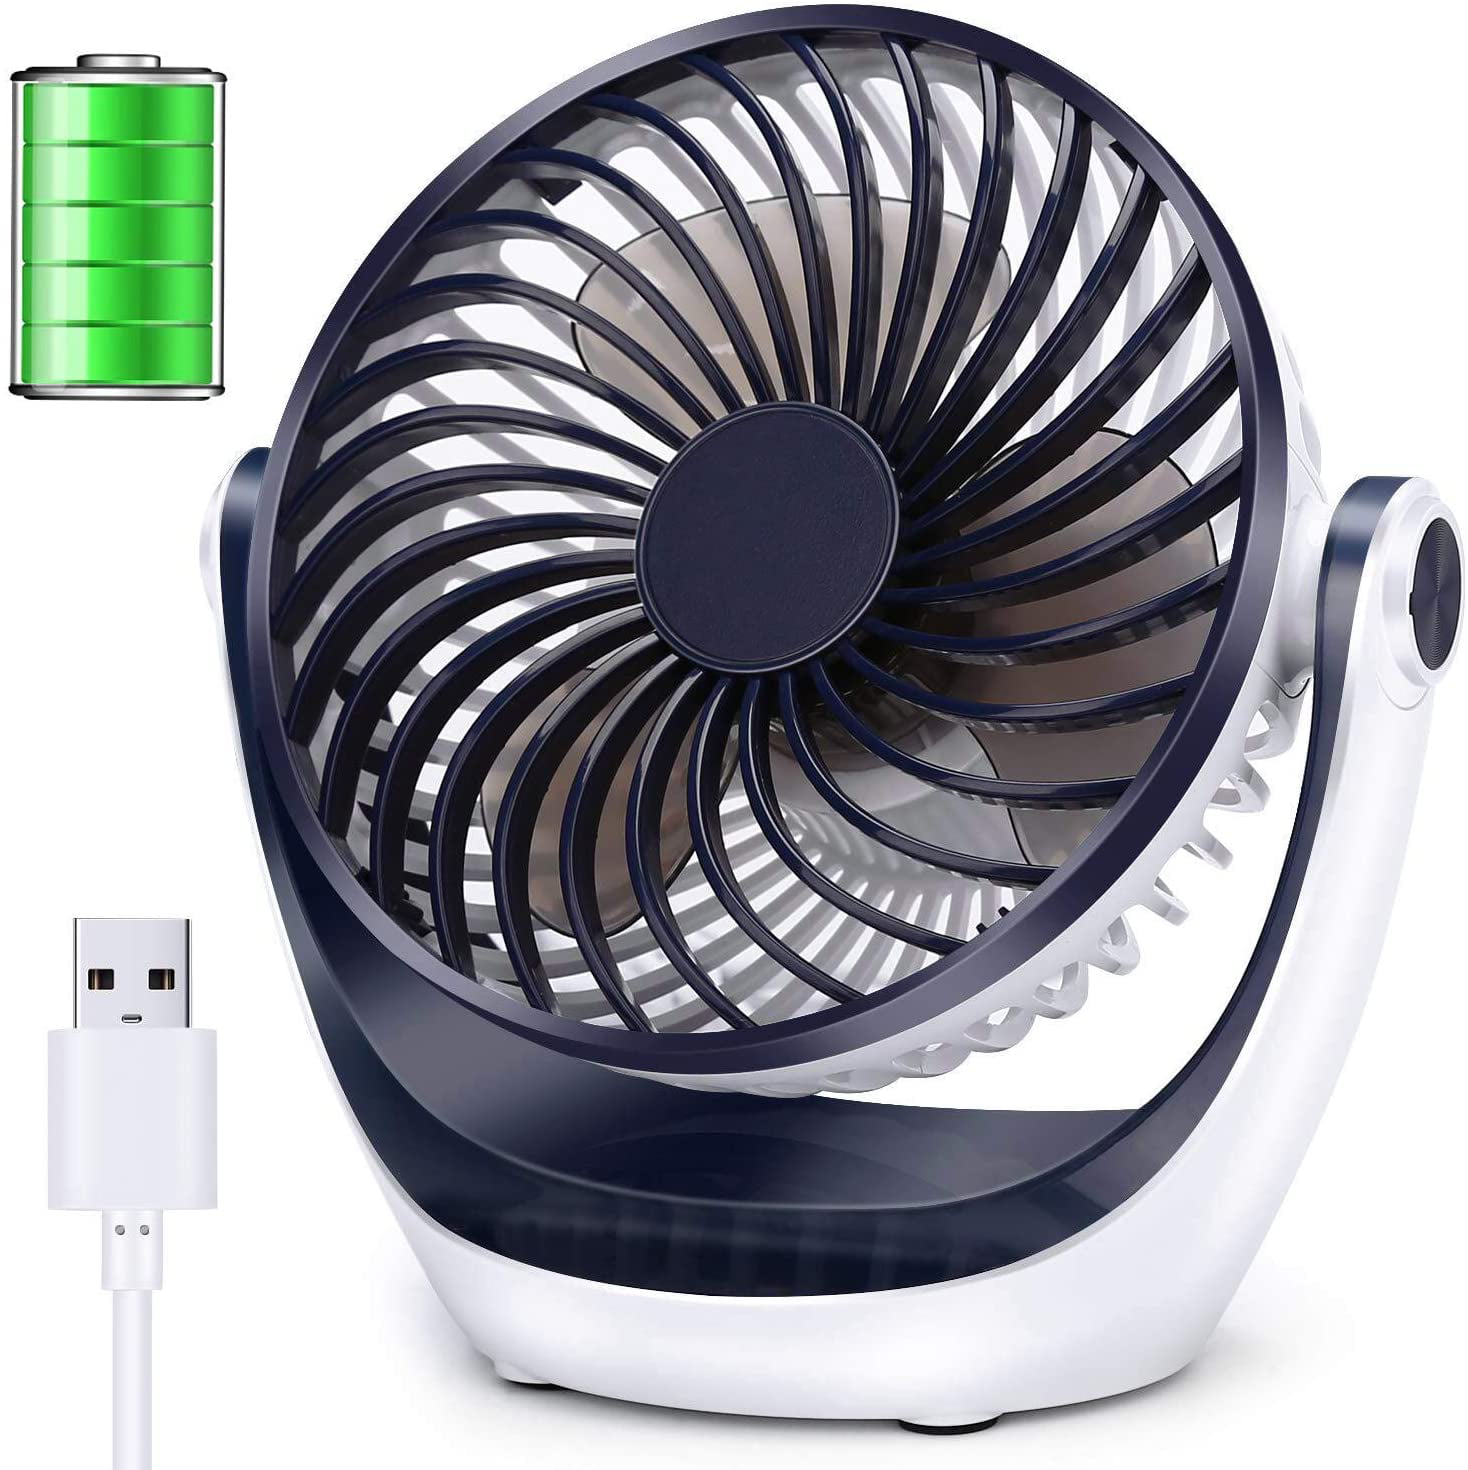 Clip on Fan with 3 Speeds Personal Portable Cooling Fan for Car Stroller Office Outdoor 360° Adjustable Head Black Rechargeable Battery Operated Mini USB Fan and Table Fan H+LUX Small Desk Fan